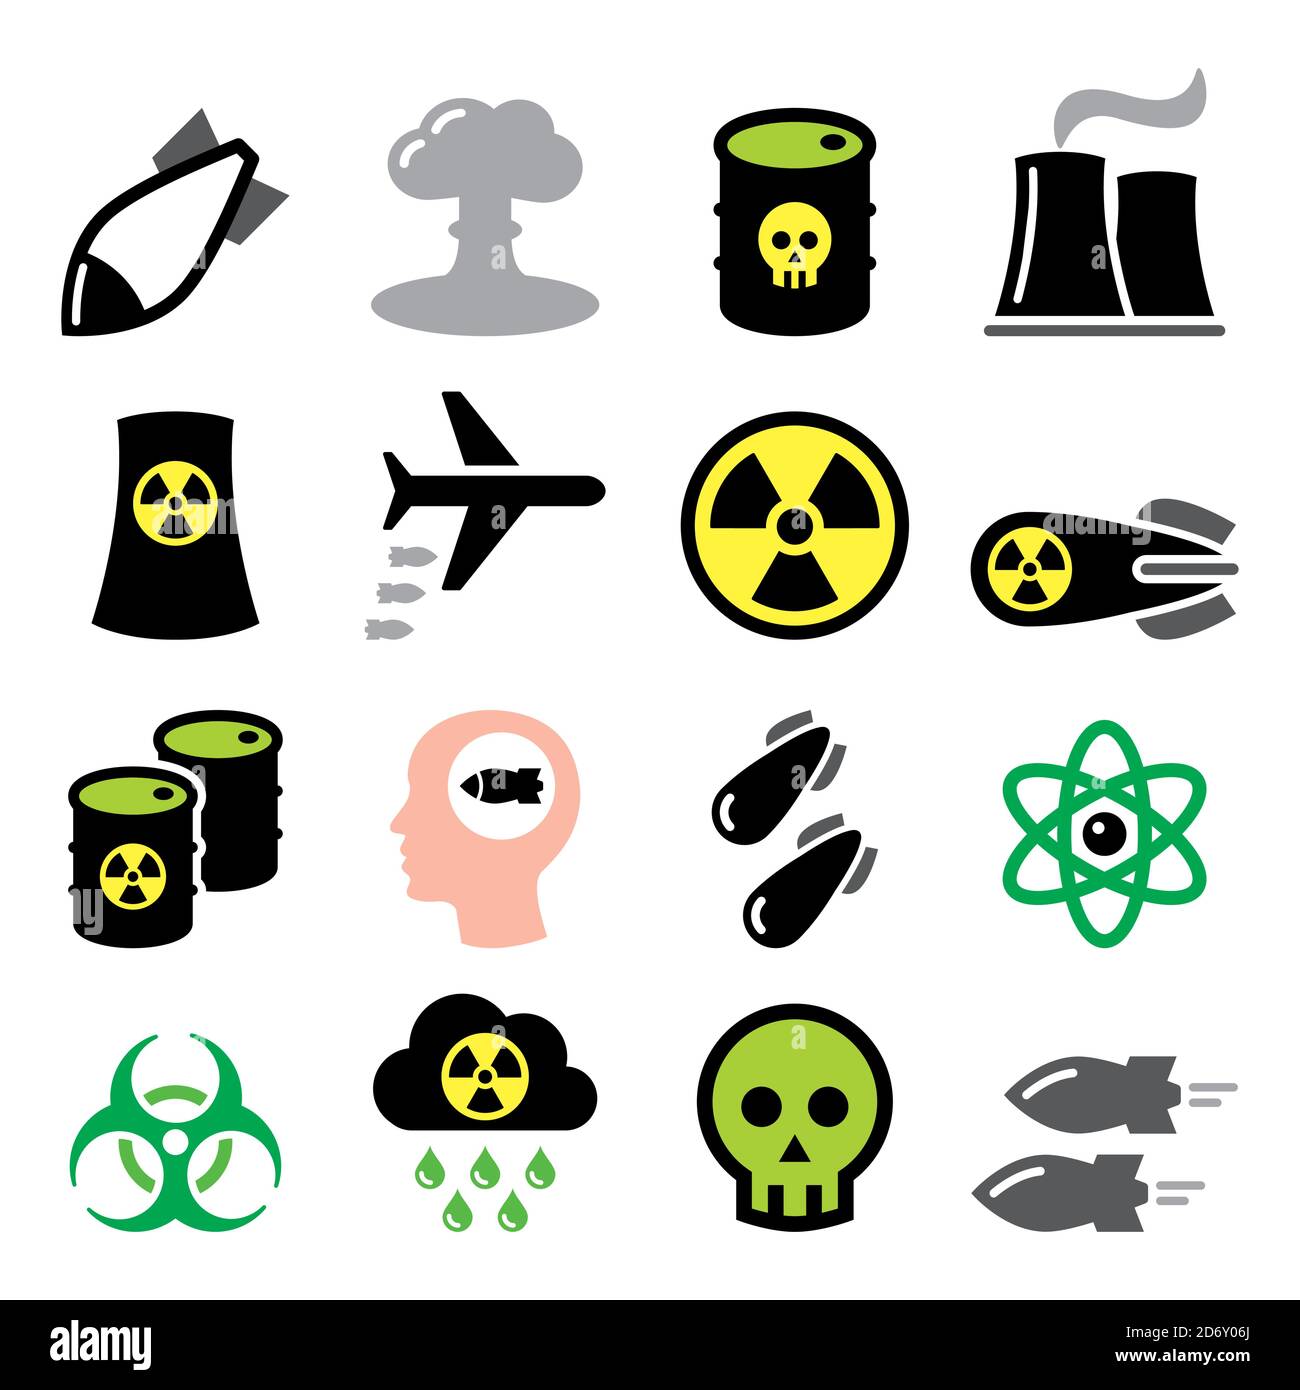 Nuclear weapon, nuclear factory, war, bombs vector icons set - biohazard warning Stock Vector